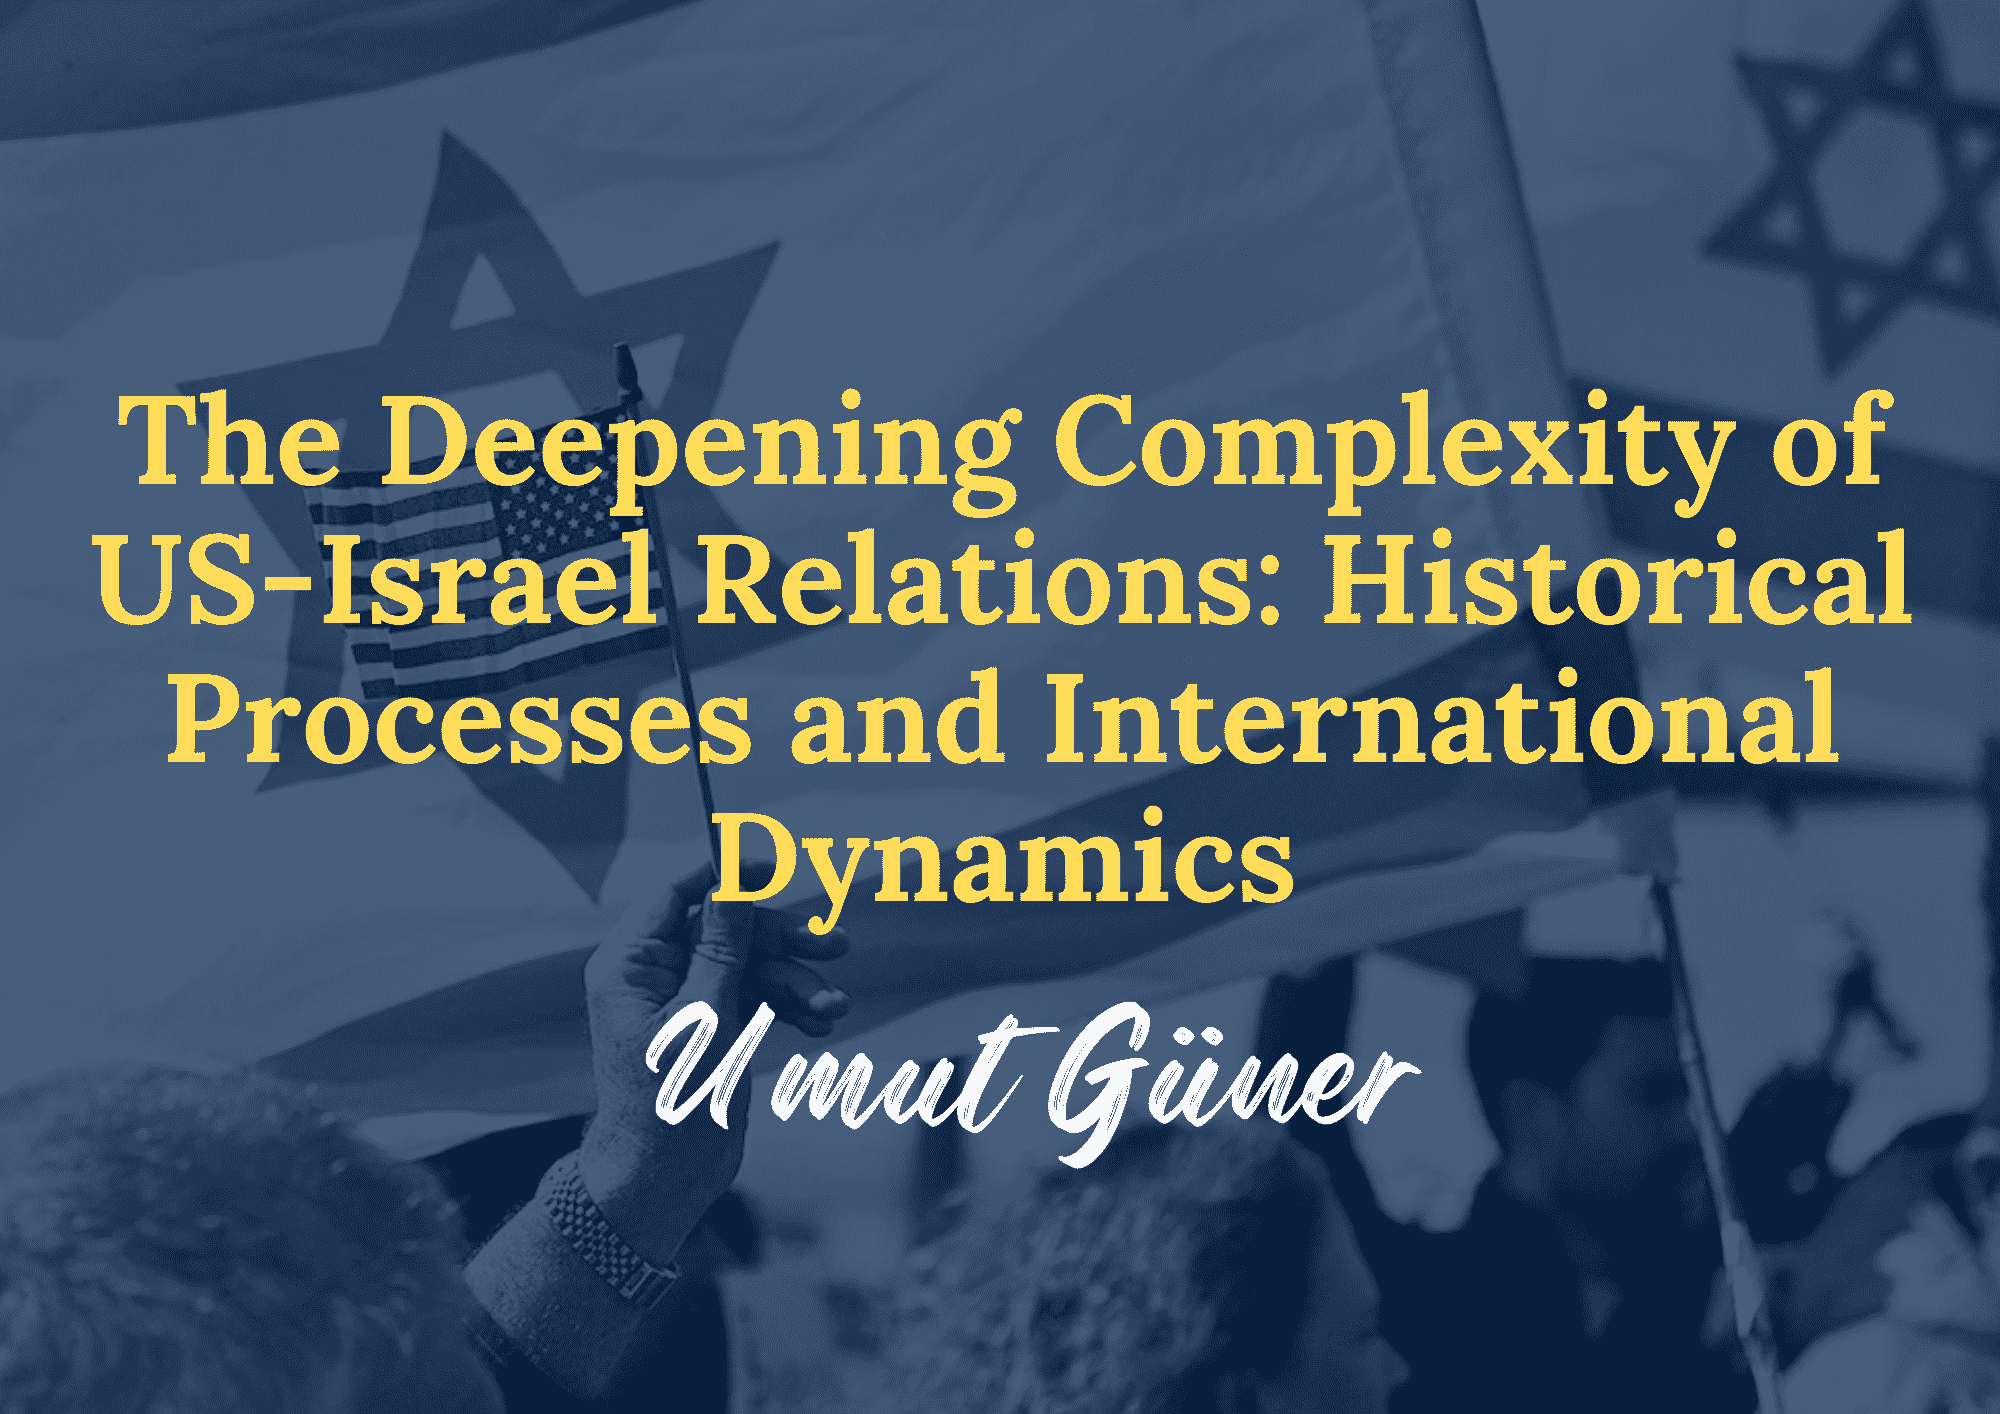 The Deepening Complexity of US-Israel Relations: Historical Processes and International Dynamics